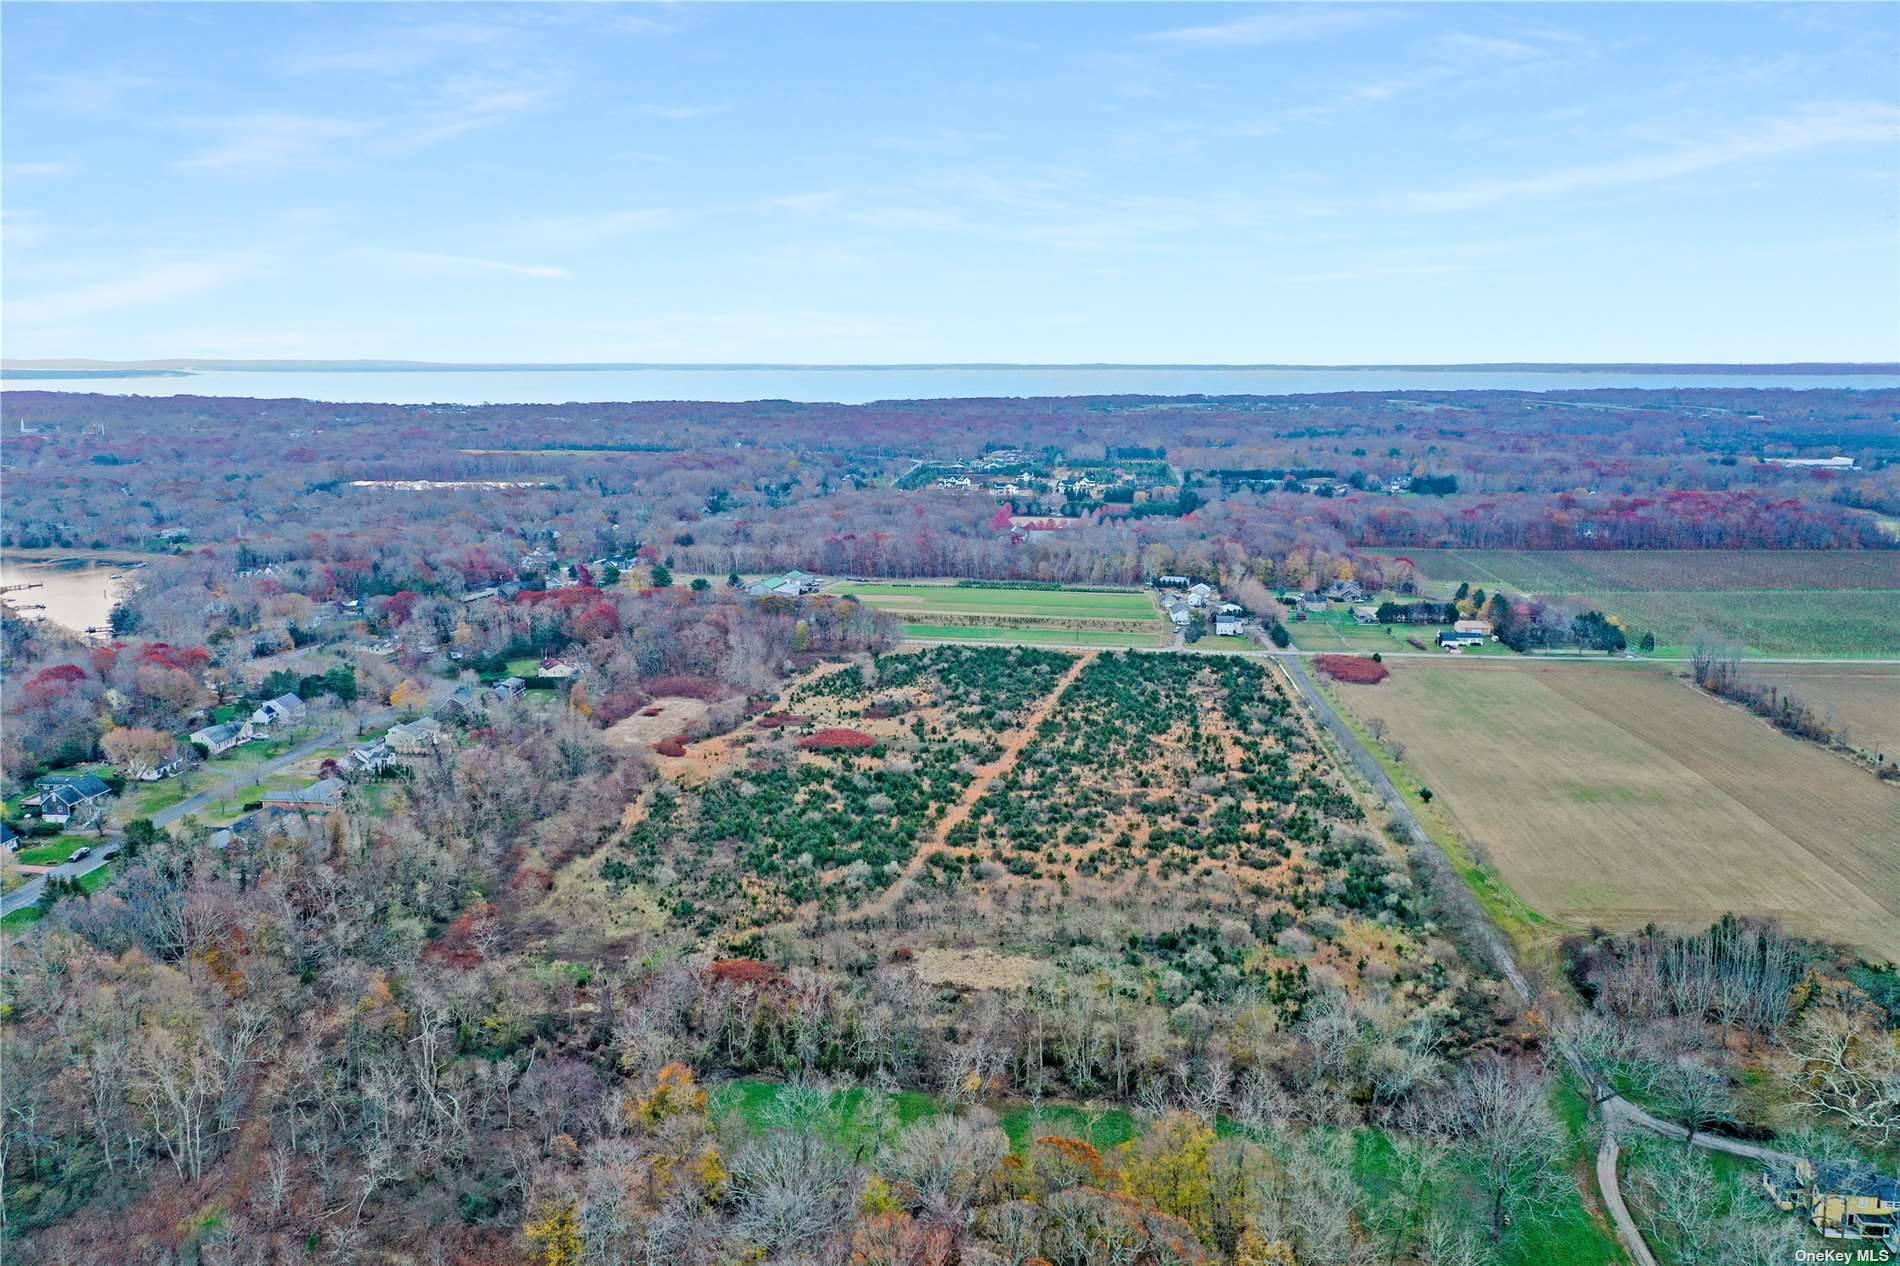 GRAND ESTATE HOME WITH ACRES AND ACRES OF VIRGIN FARMLAND INCLUDED !